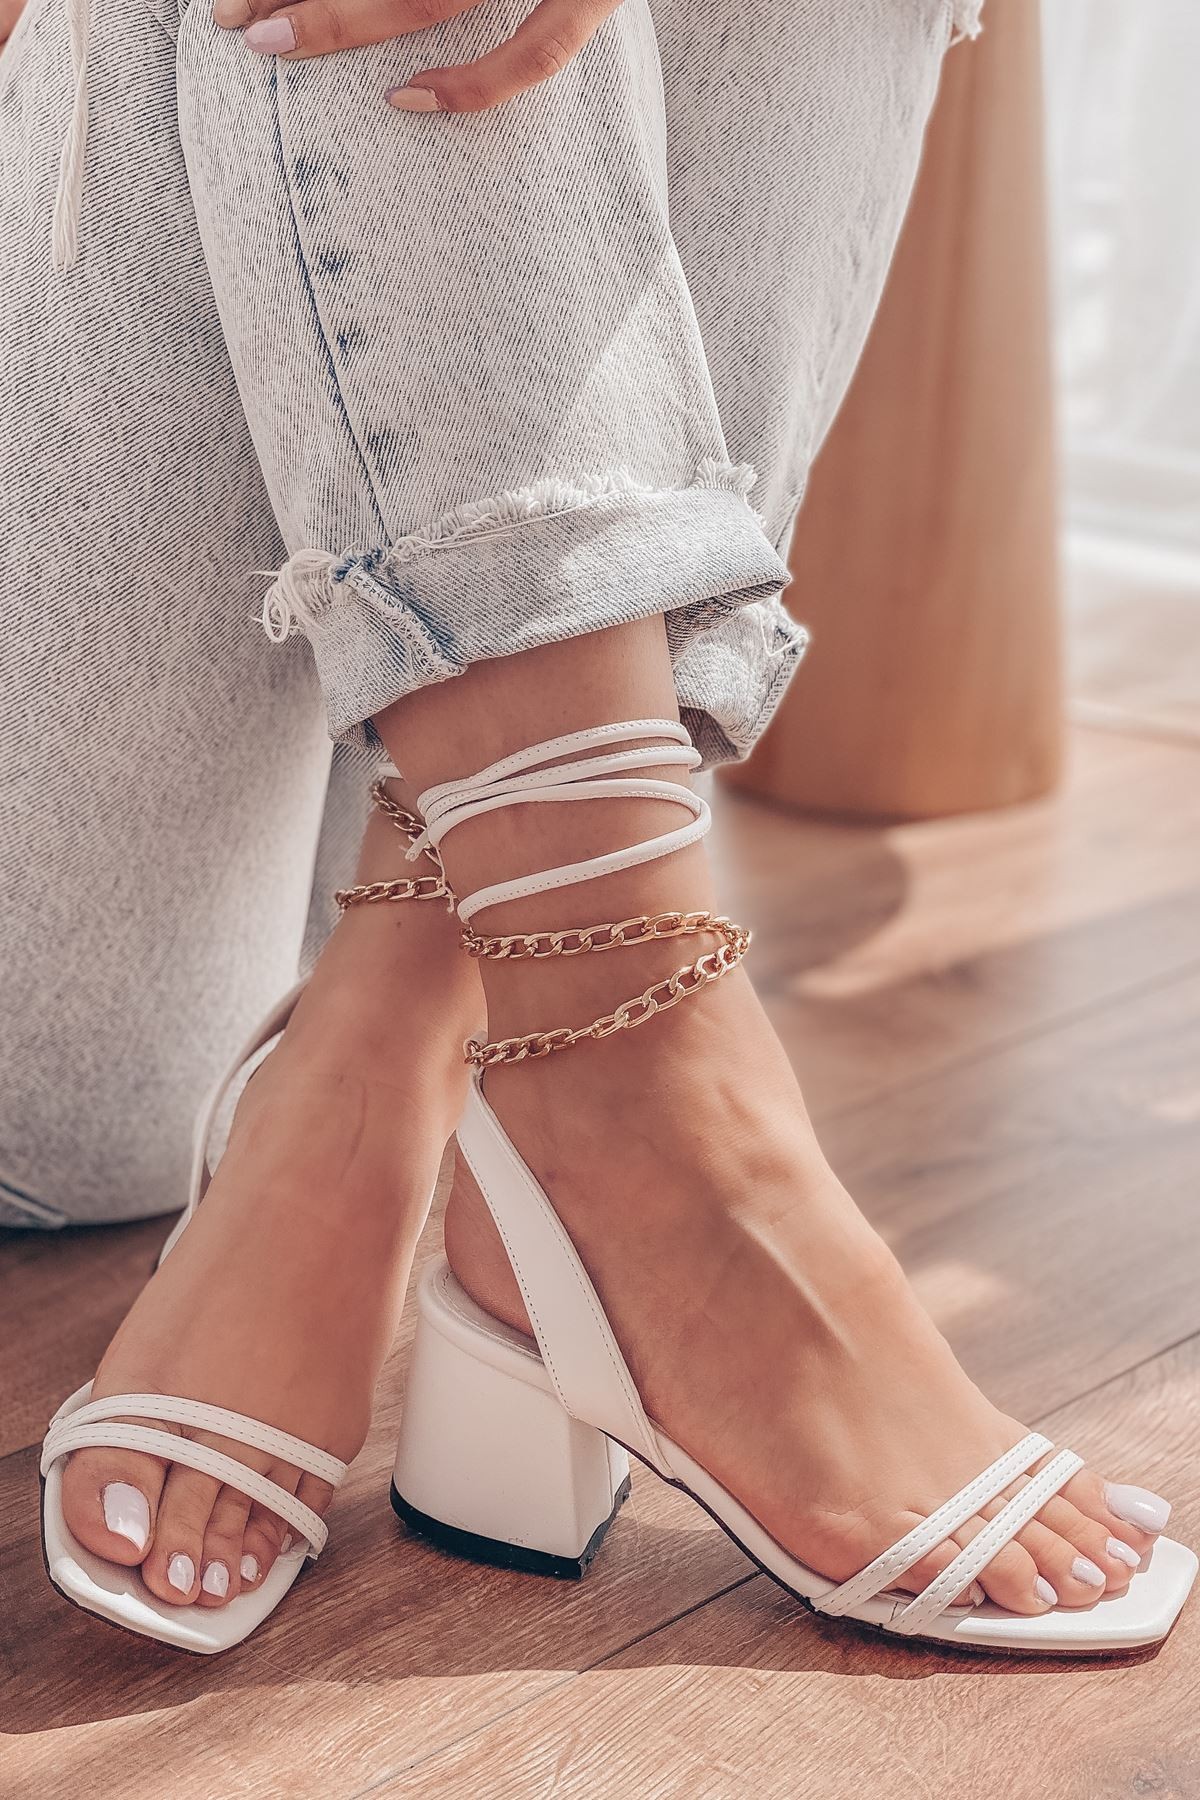 Bargeta matte leather short heeled shoes white